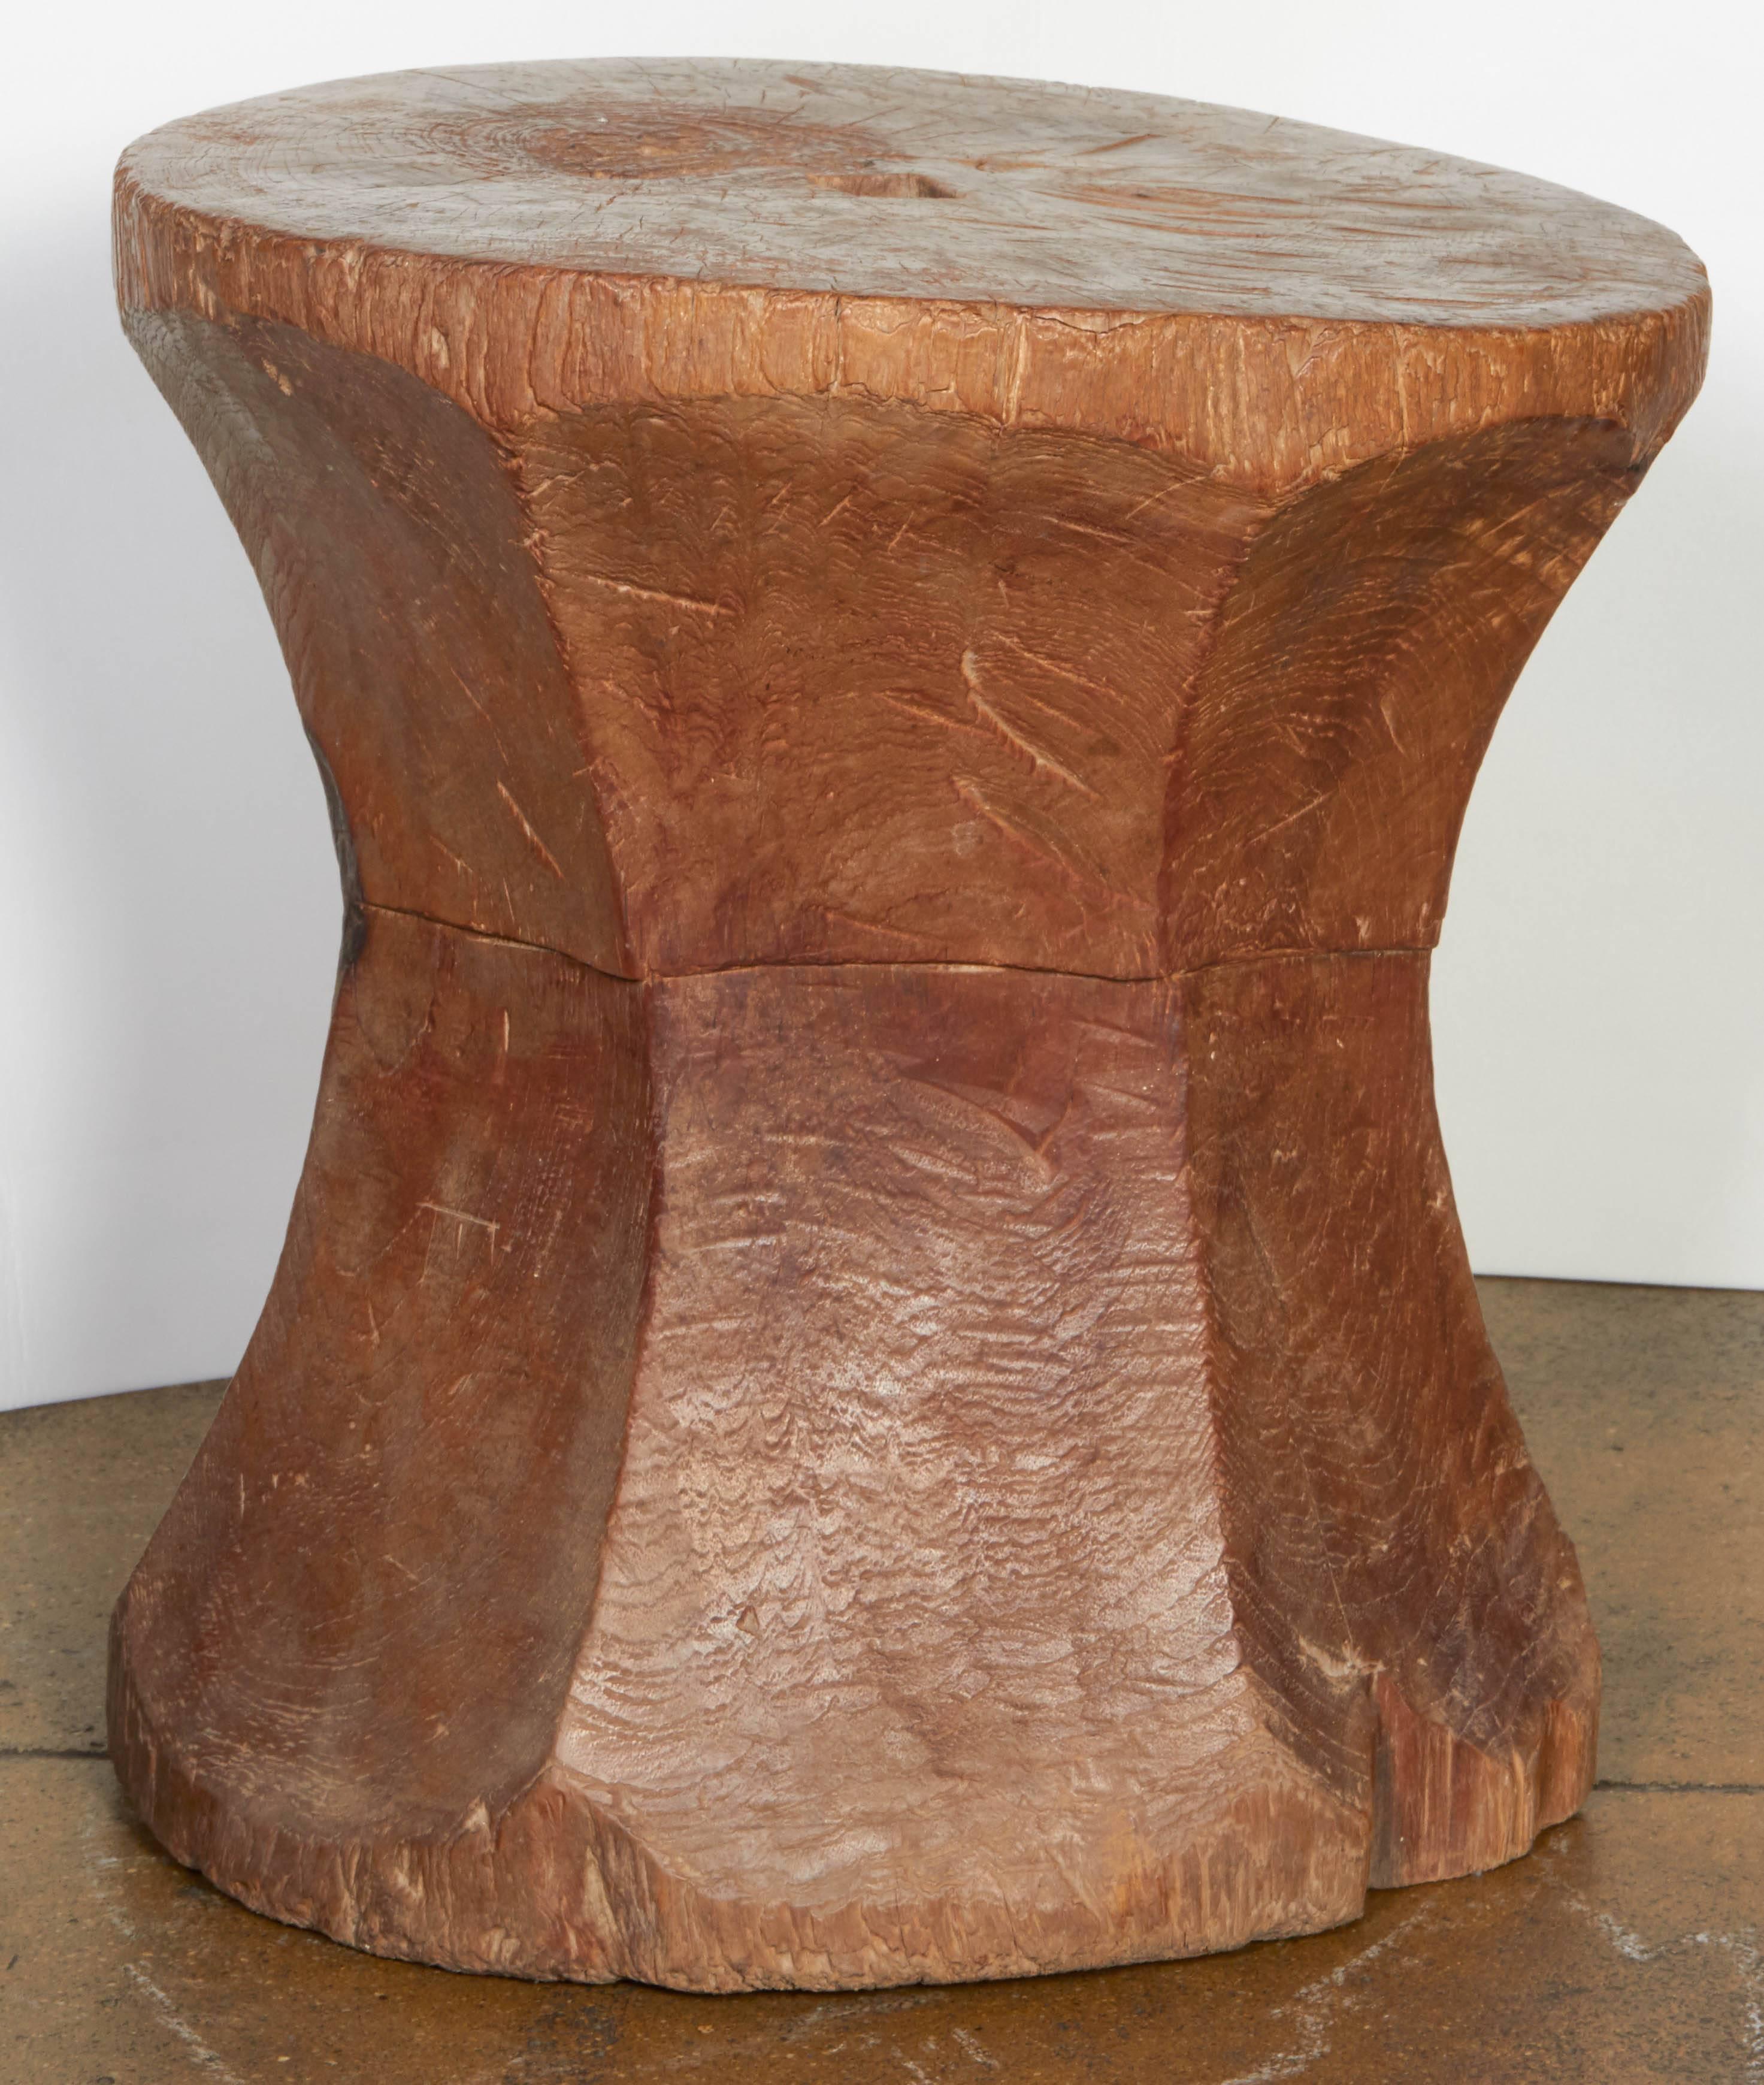 A hand-carved teakwood end table from Indonesia. Natural finish.